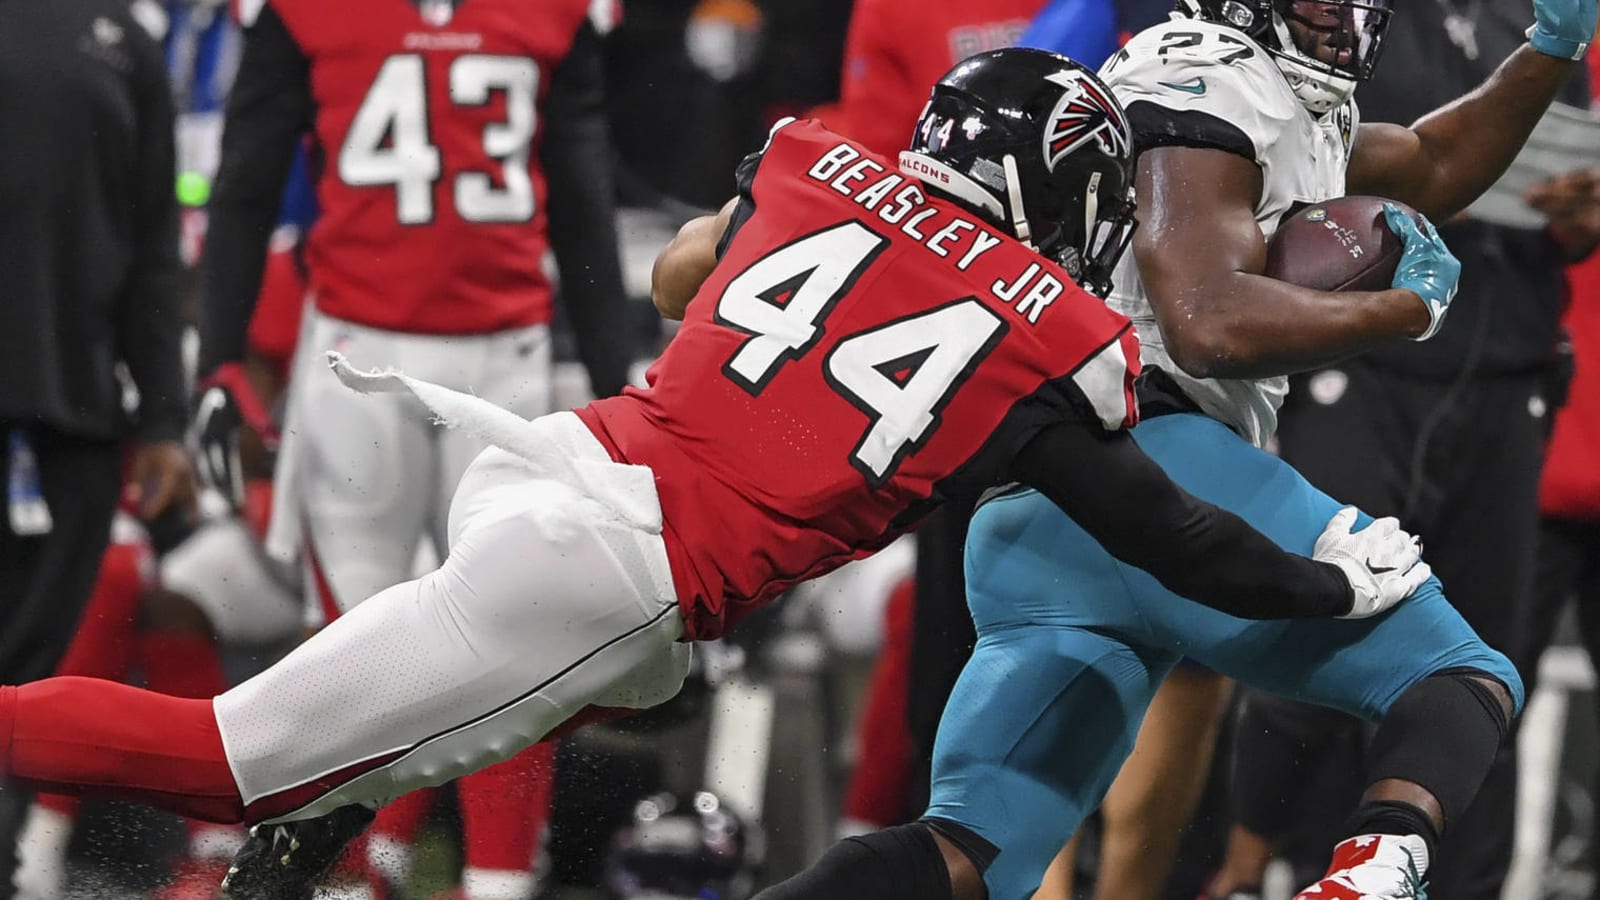 Despite 'unexcused' absence, Titans GM expects Vic Beasley to report to team